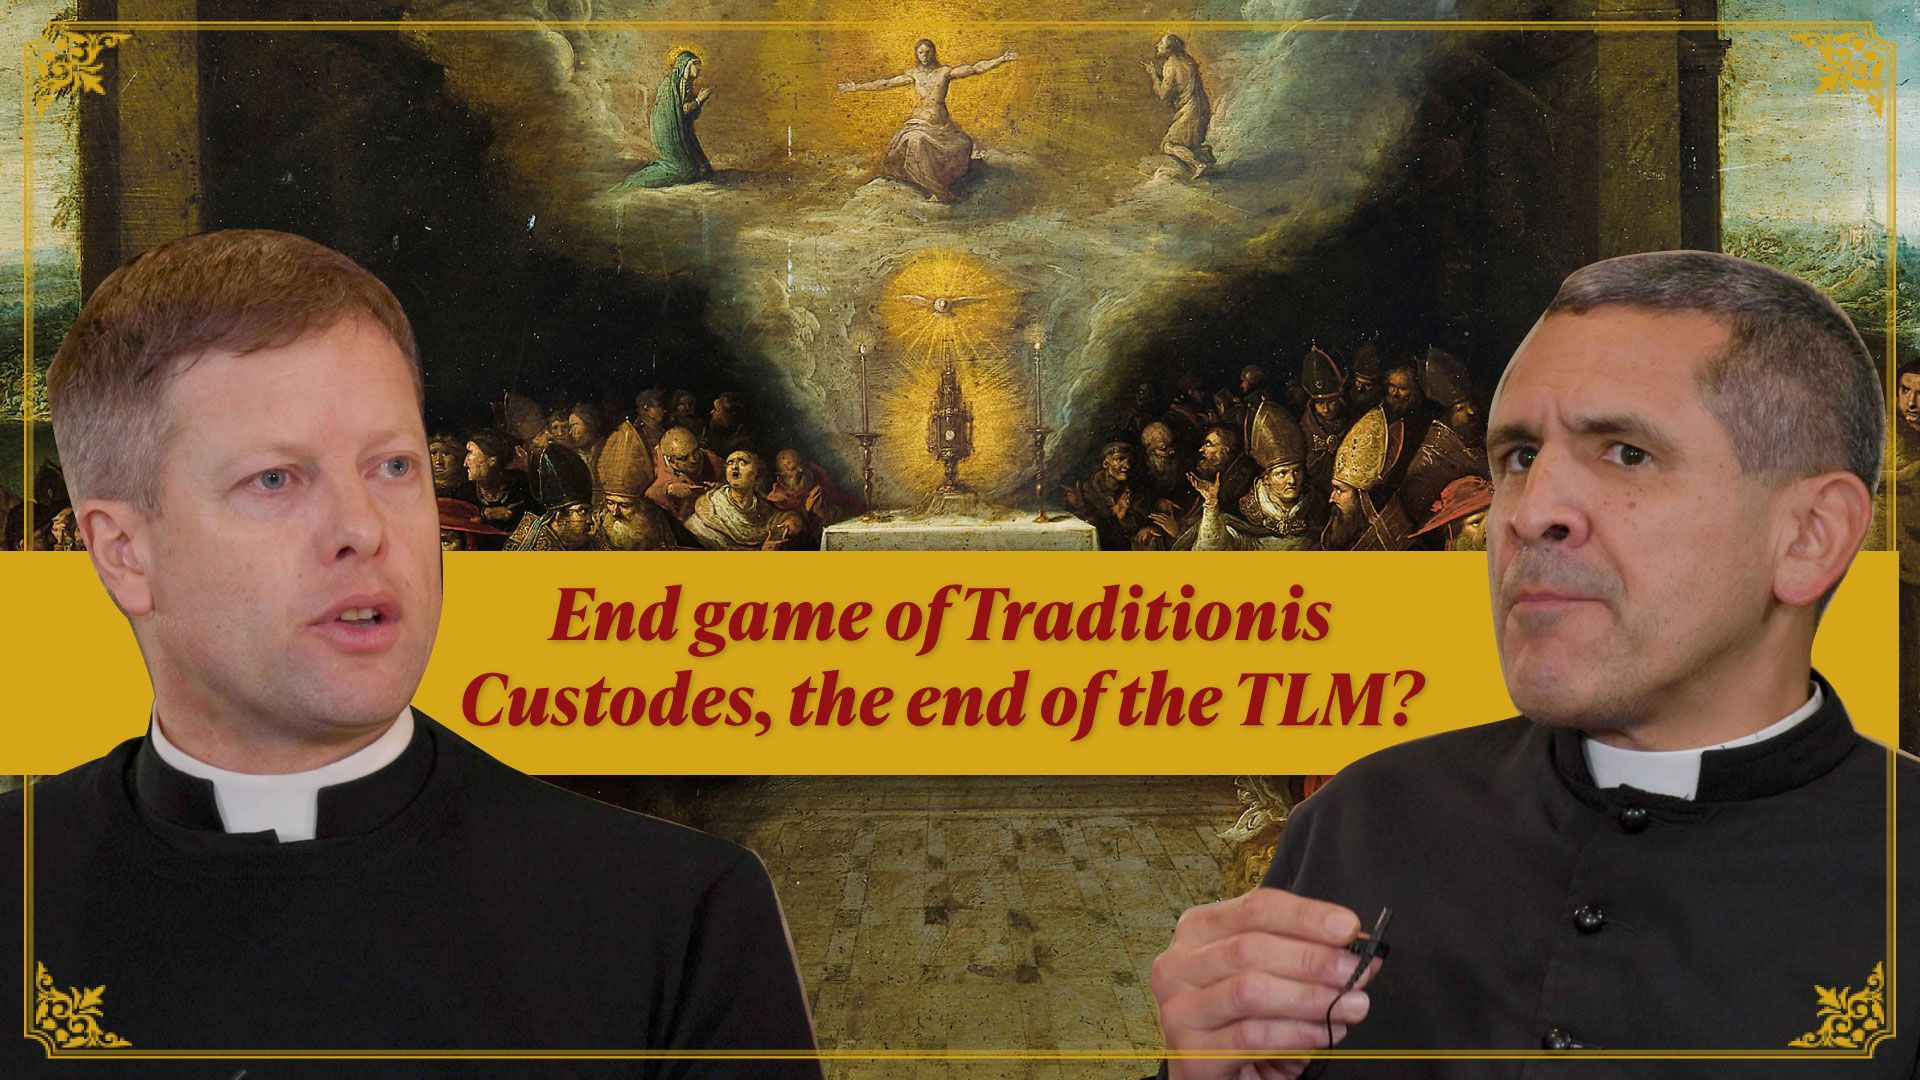 What's the end game of Traditionis Custodes?